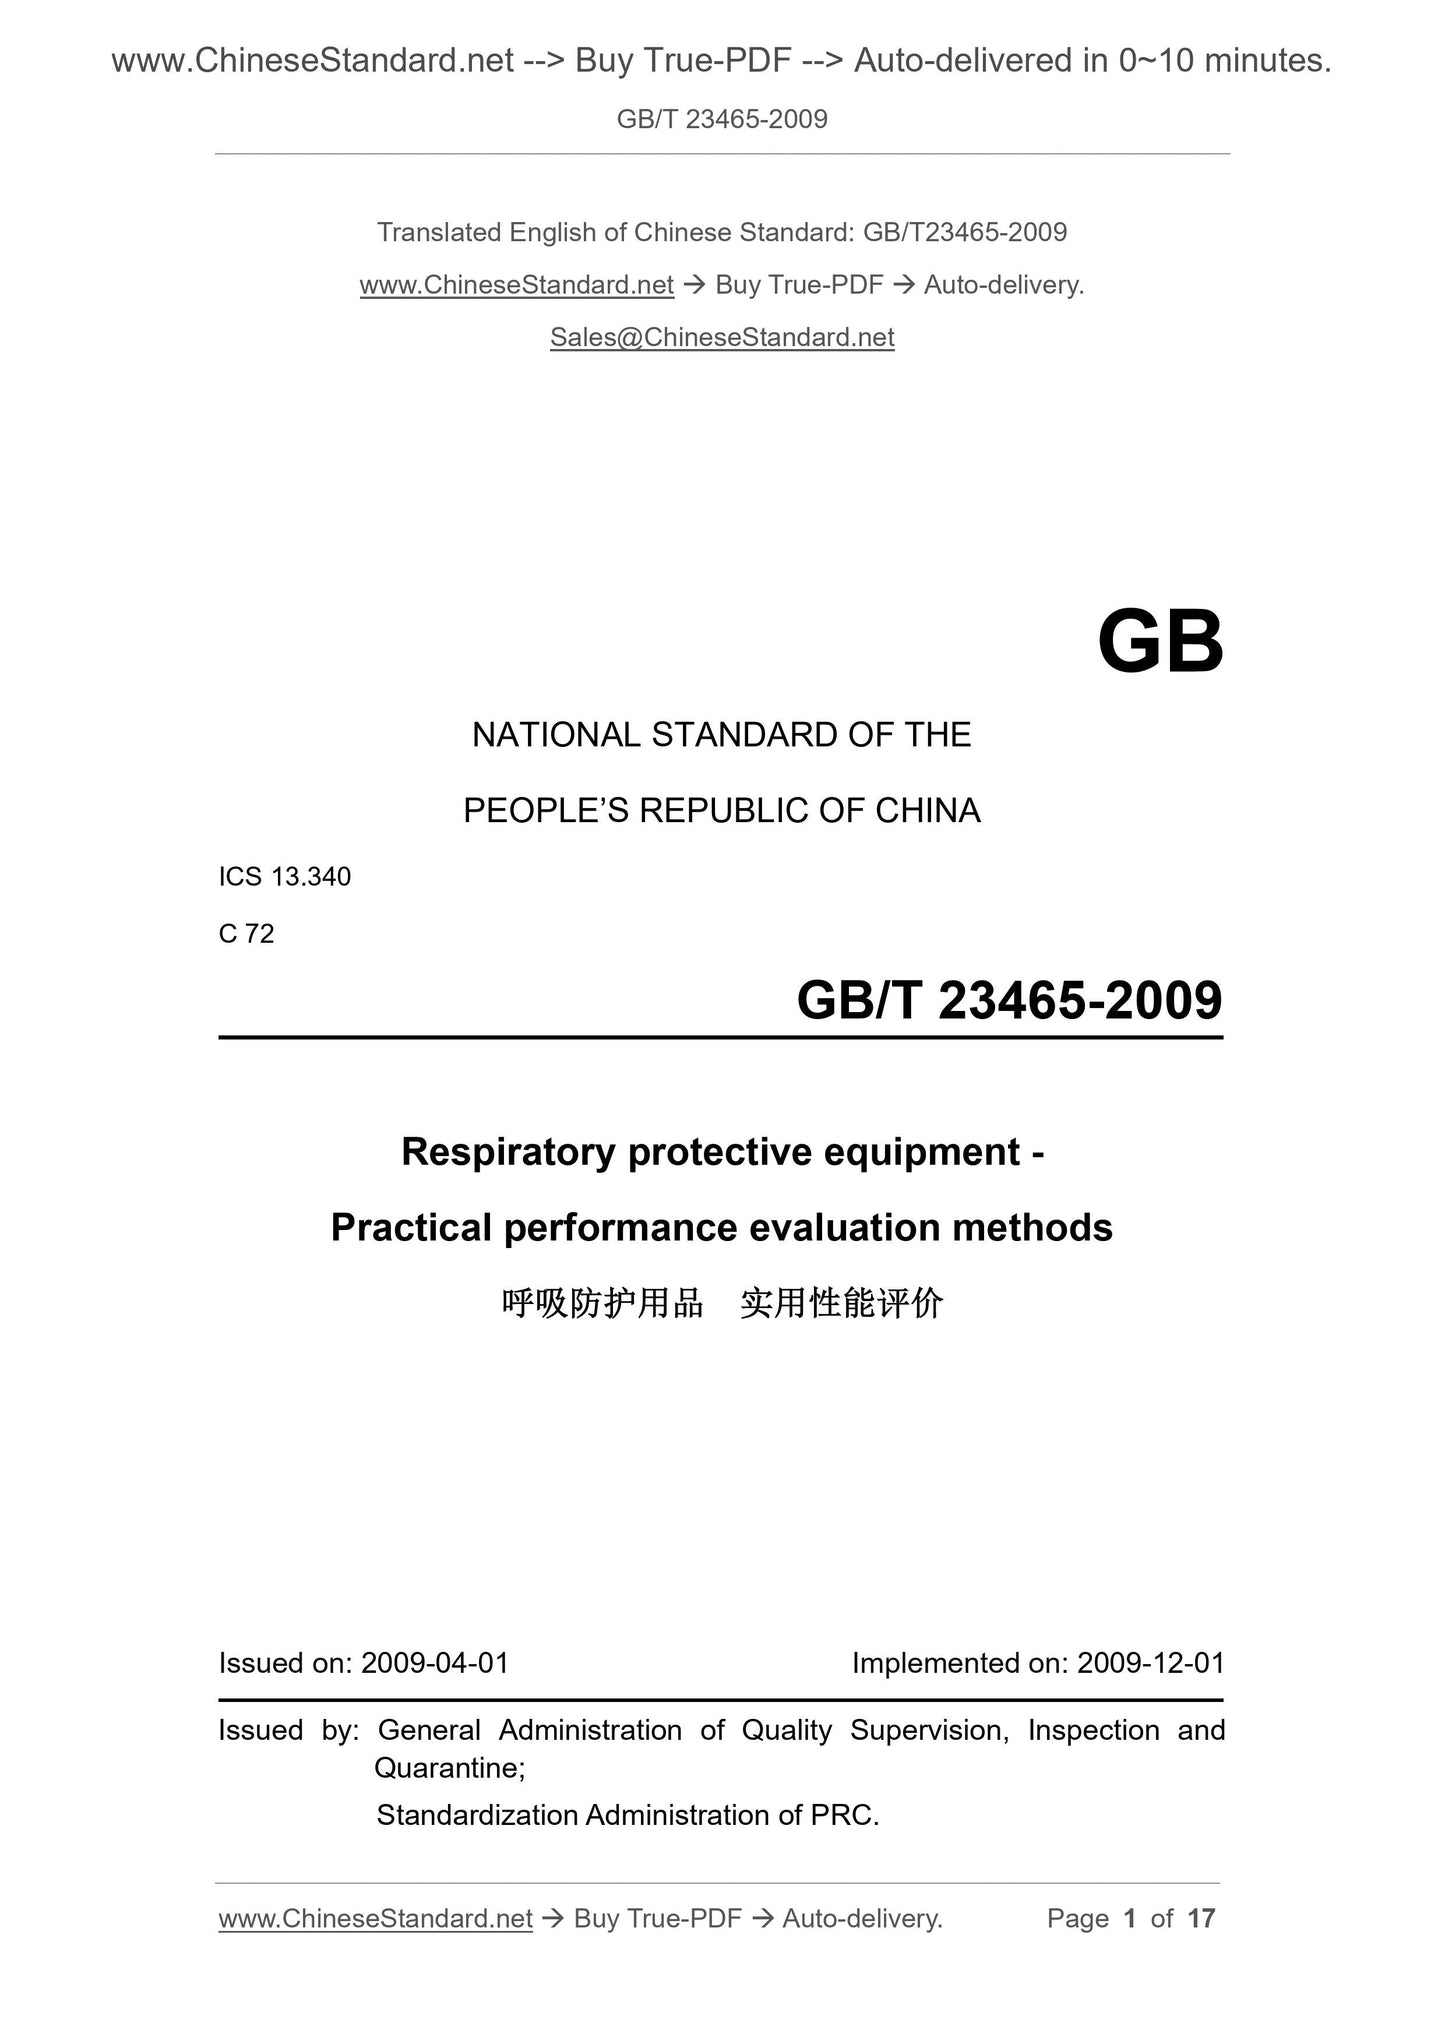 GB/T 23465-2009 Page 1